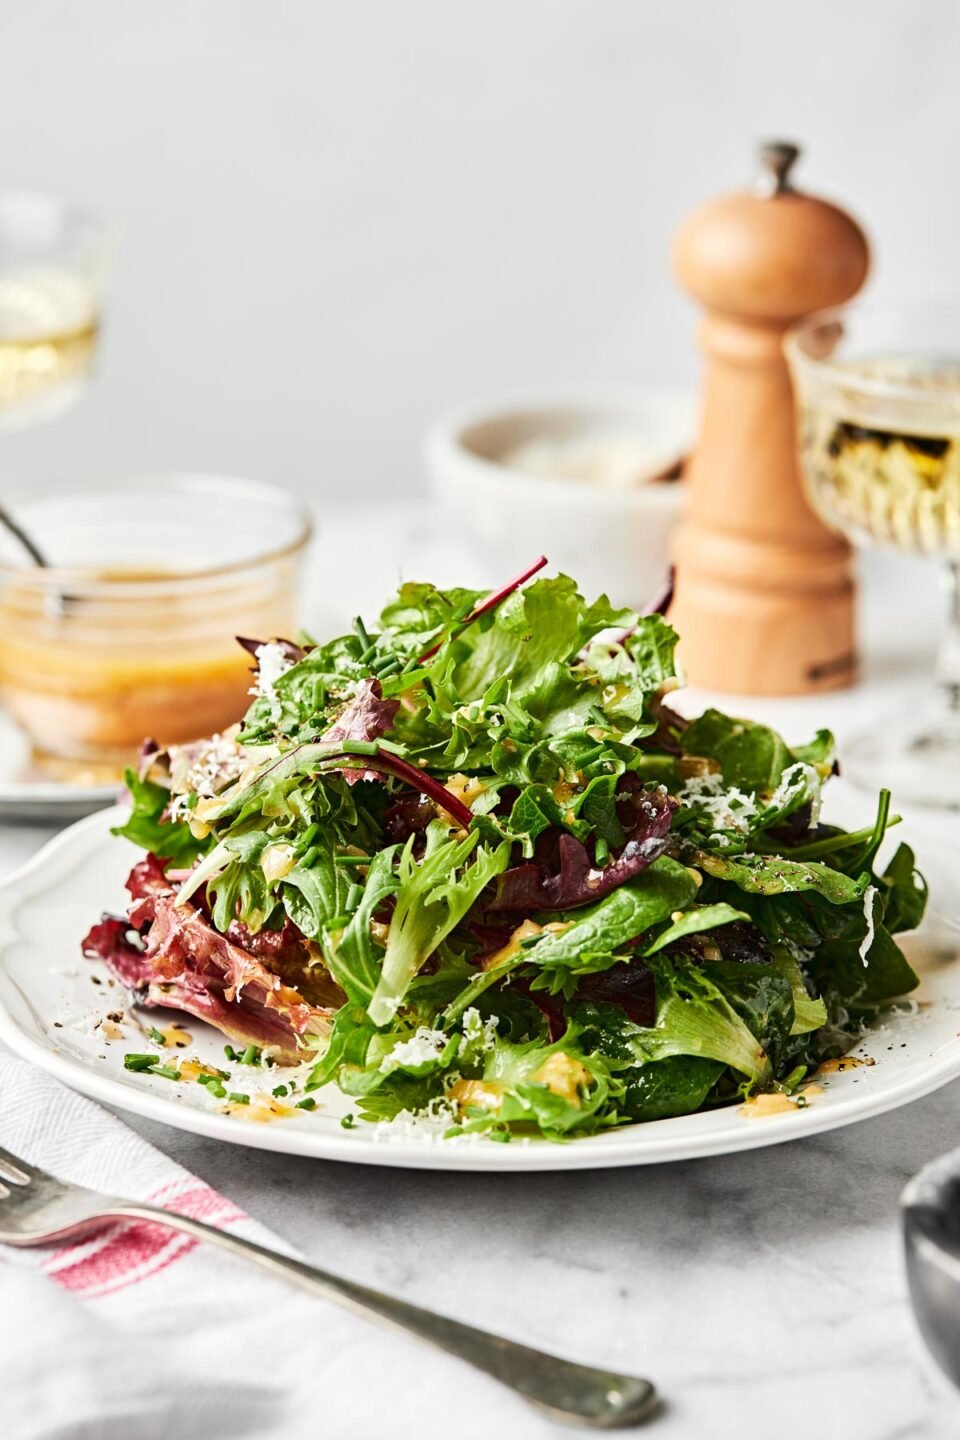 A side shot of bistro greens piled high on a white plate atop a white marbled surface. In the background, there is a glass bowl of dressing, two glasses of wine and a pepper grinder.